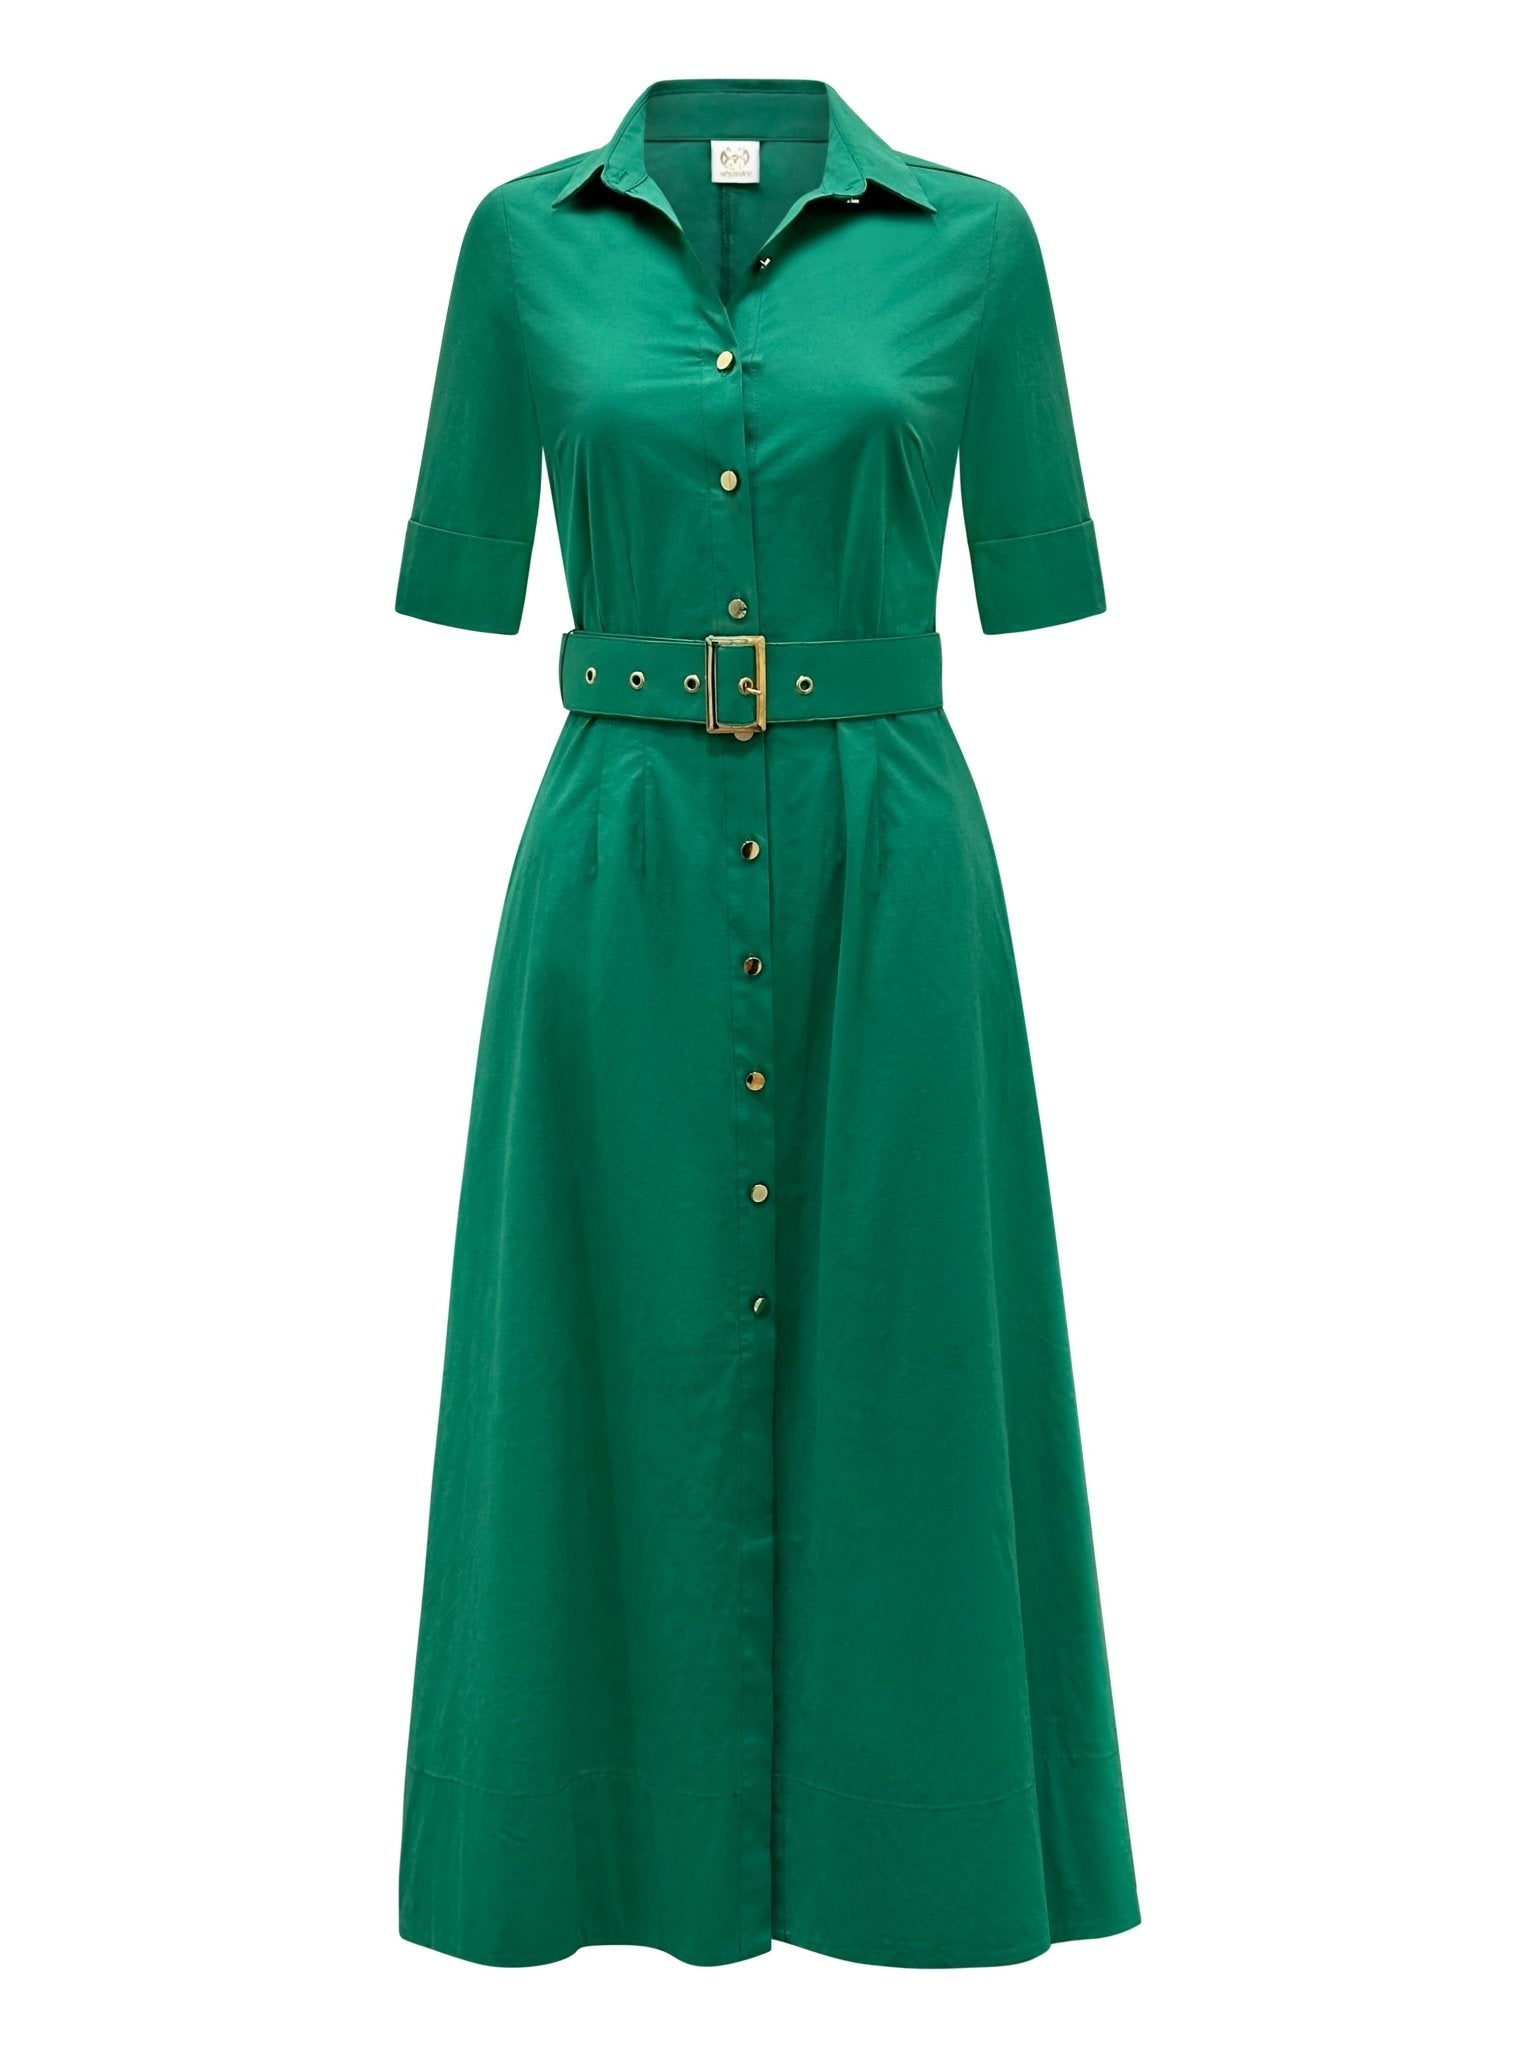 The "Kate" Dress Green-Why Mary-stride